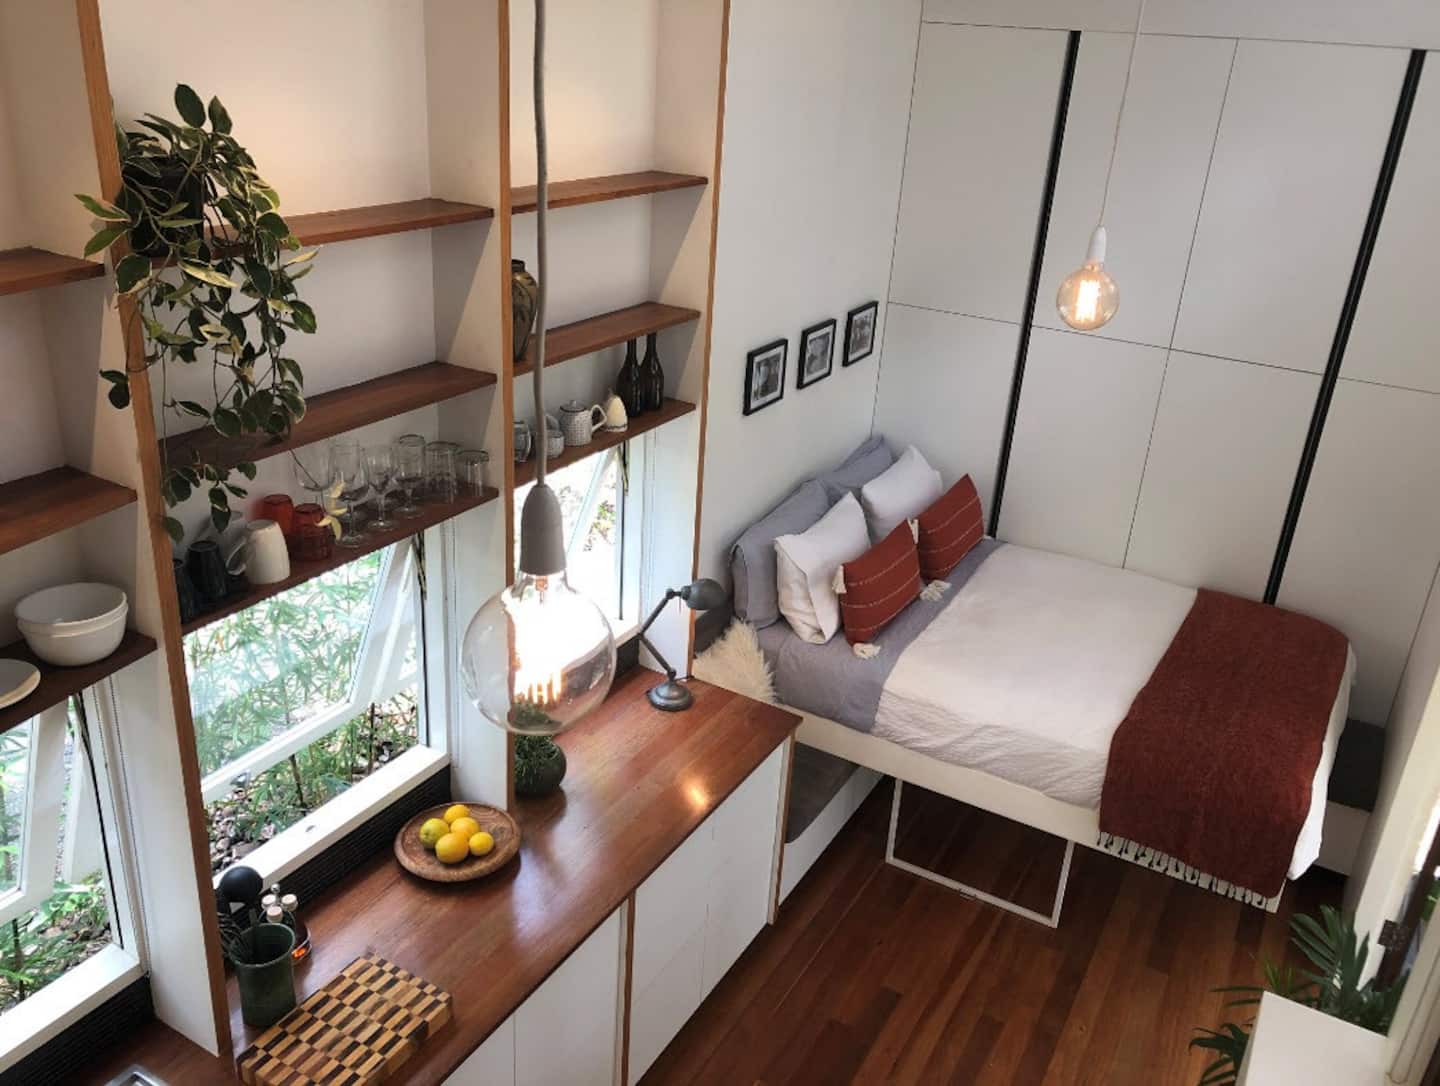 a bed and shelves inside a tiny house